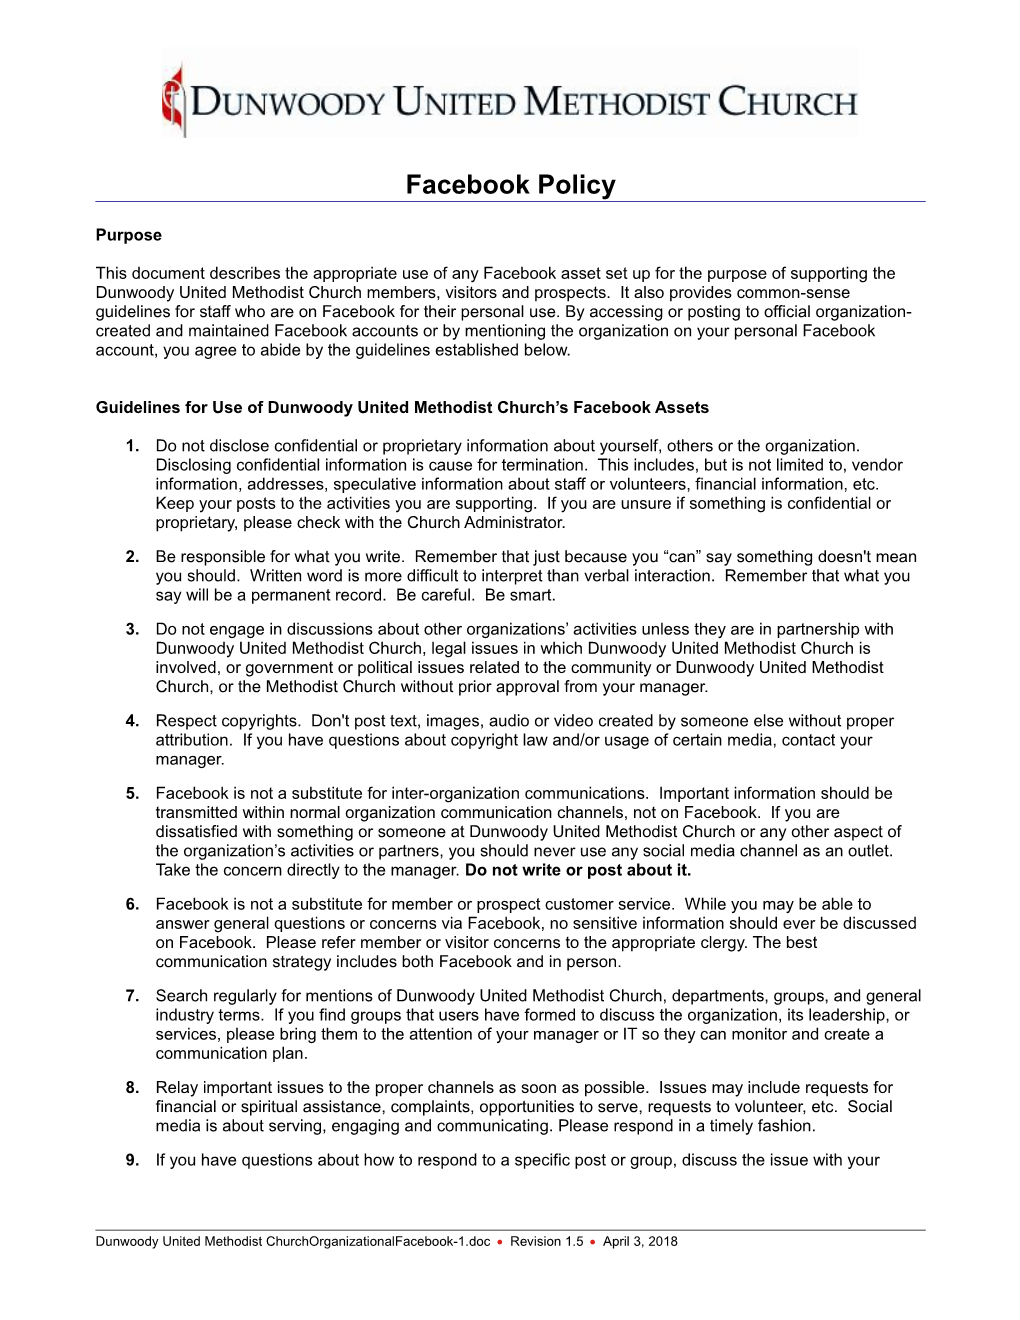 BLOGGING POLICY for Company FACEBOOK PAGE